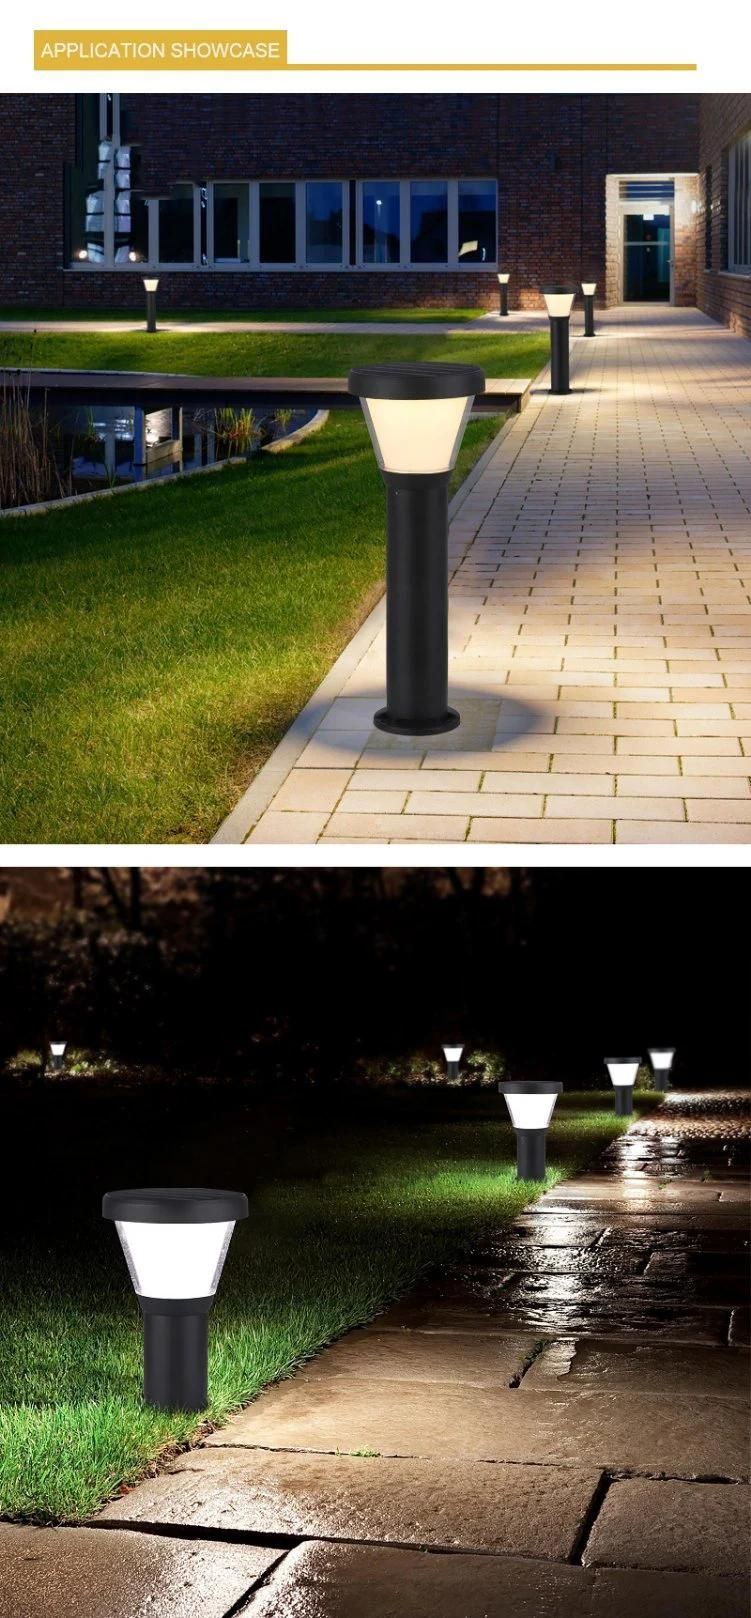 2022 Smart Warm White Decorative Pathway All in One Park Solar Lamps Outdoor LED Garden Light